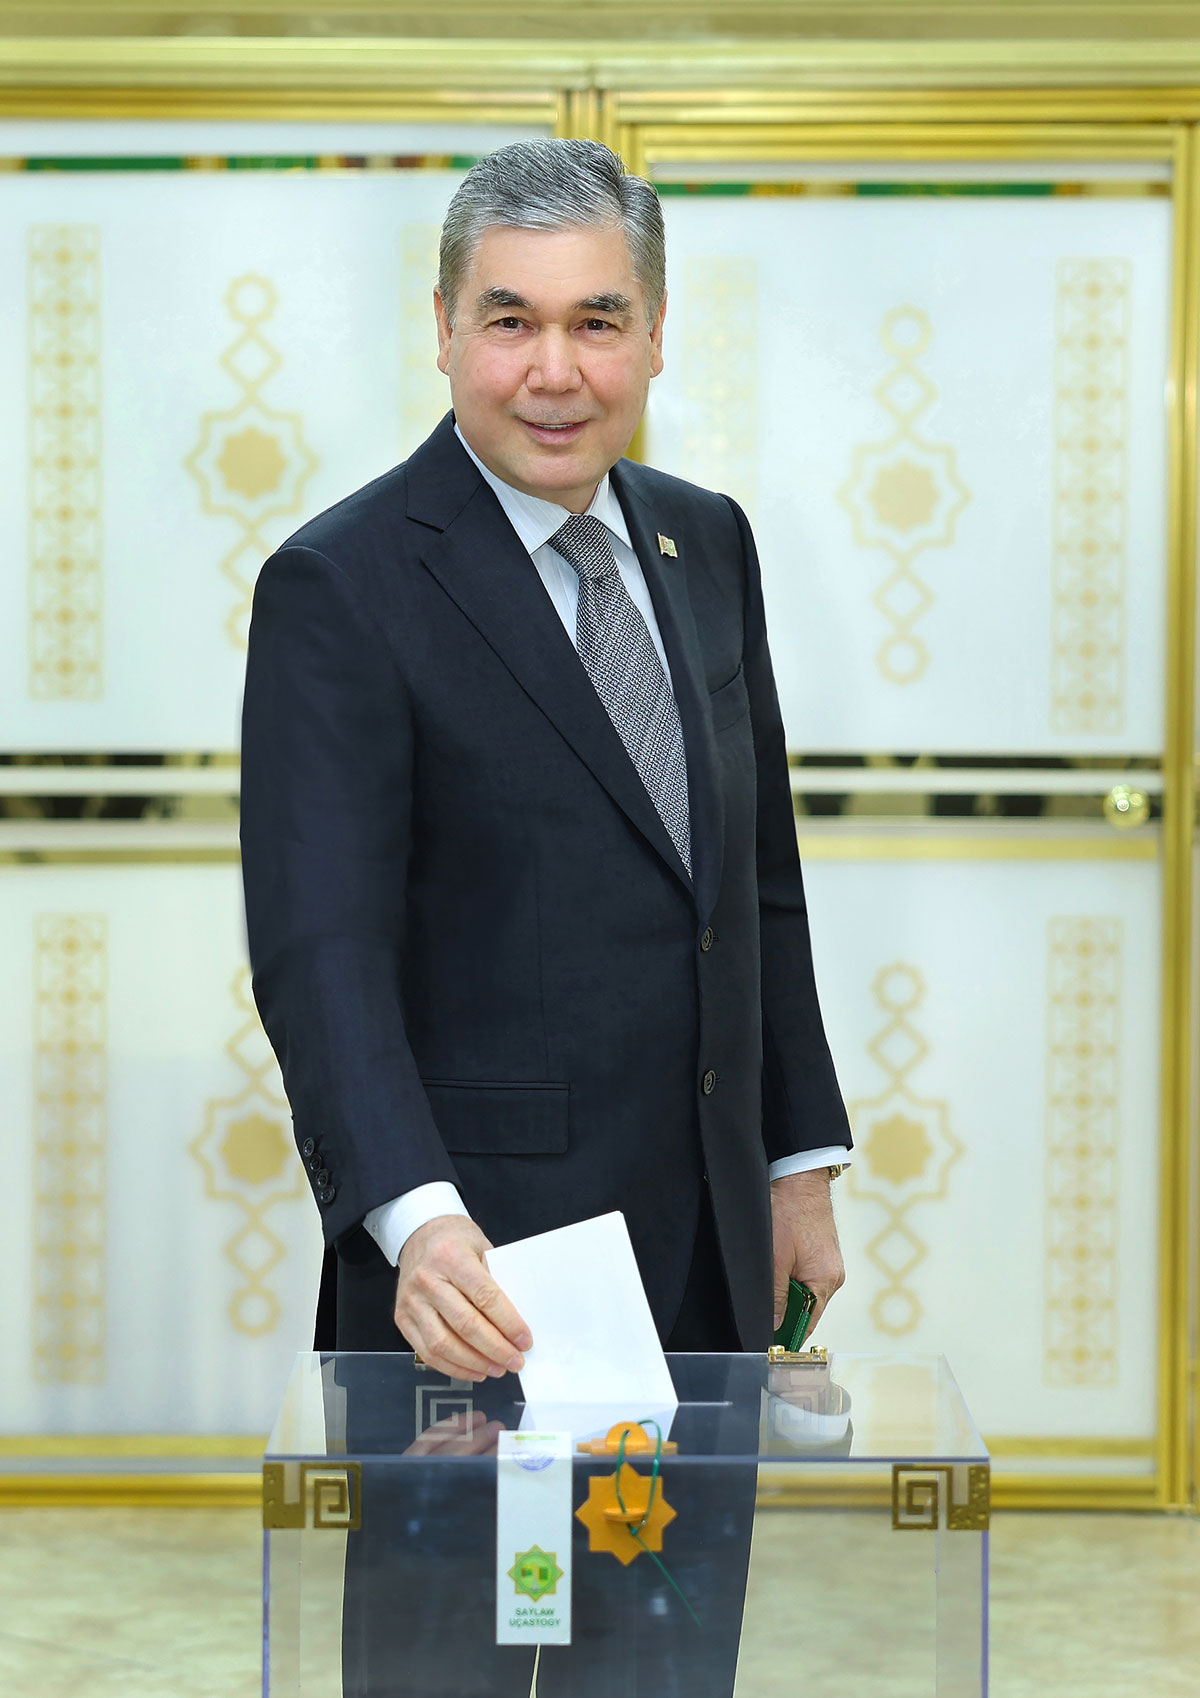 National Leader of the Turkmen people, Chairman of the Halk Maslakhaty of Turkmenistan took part in parliamentary elections